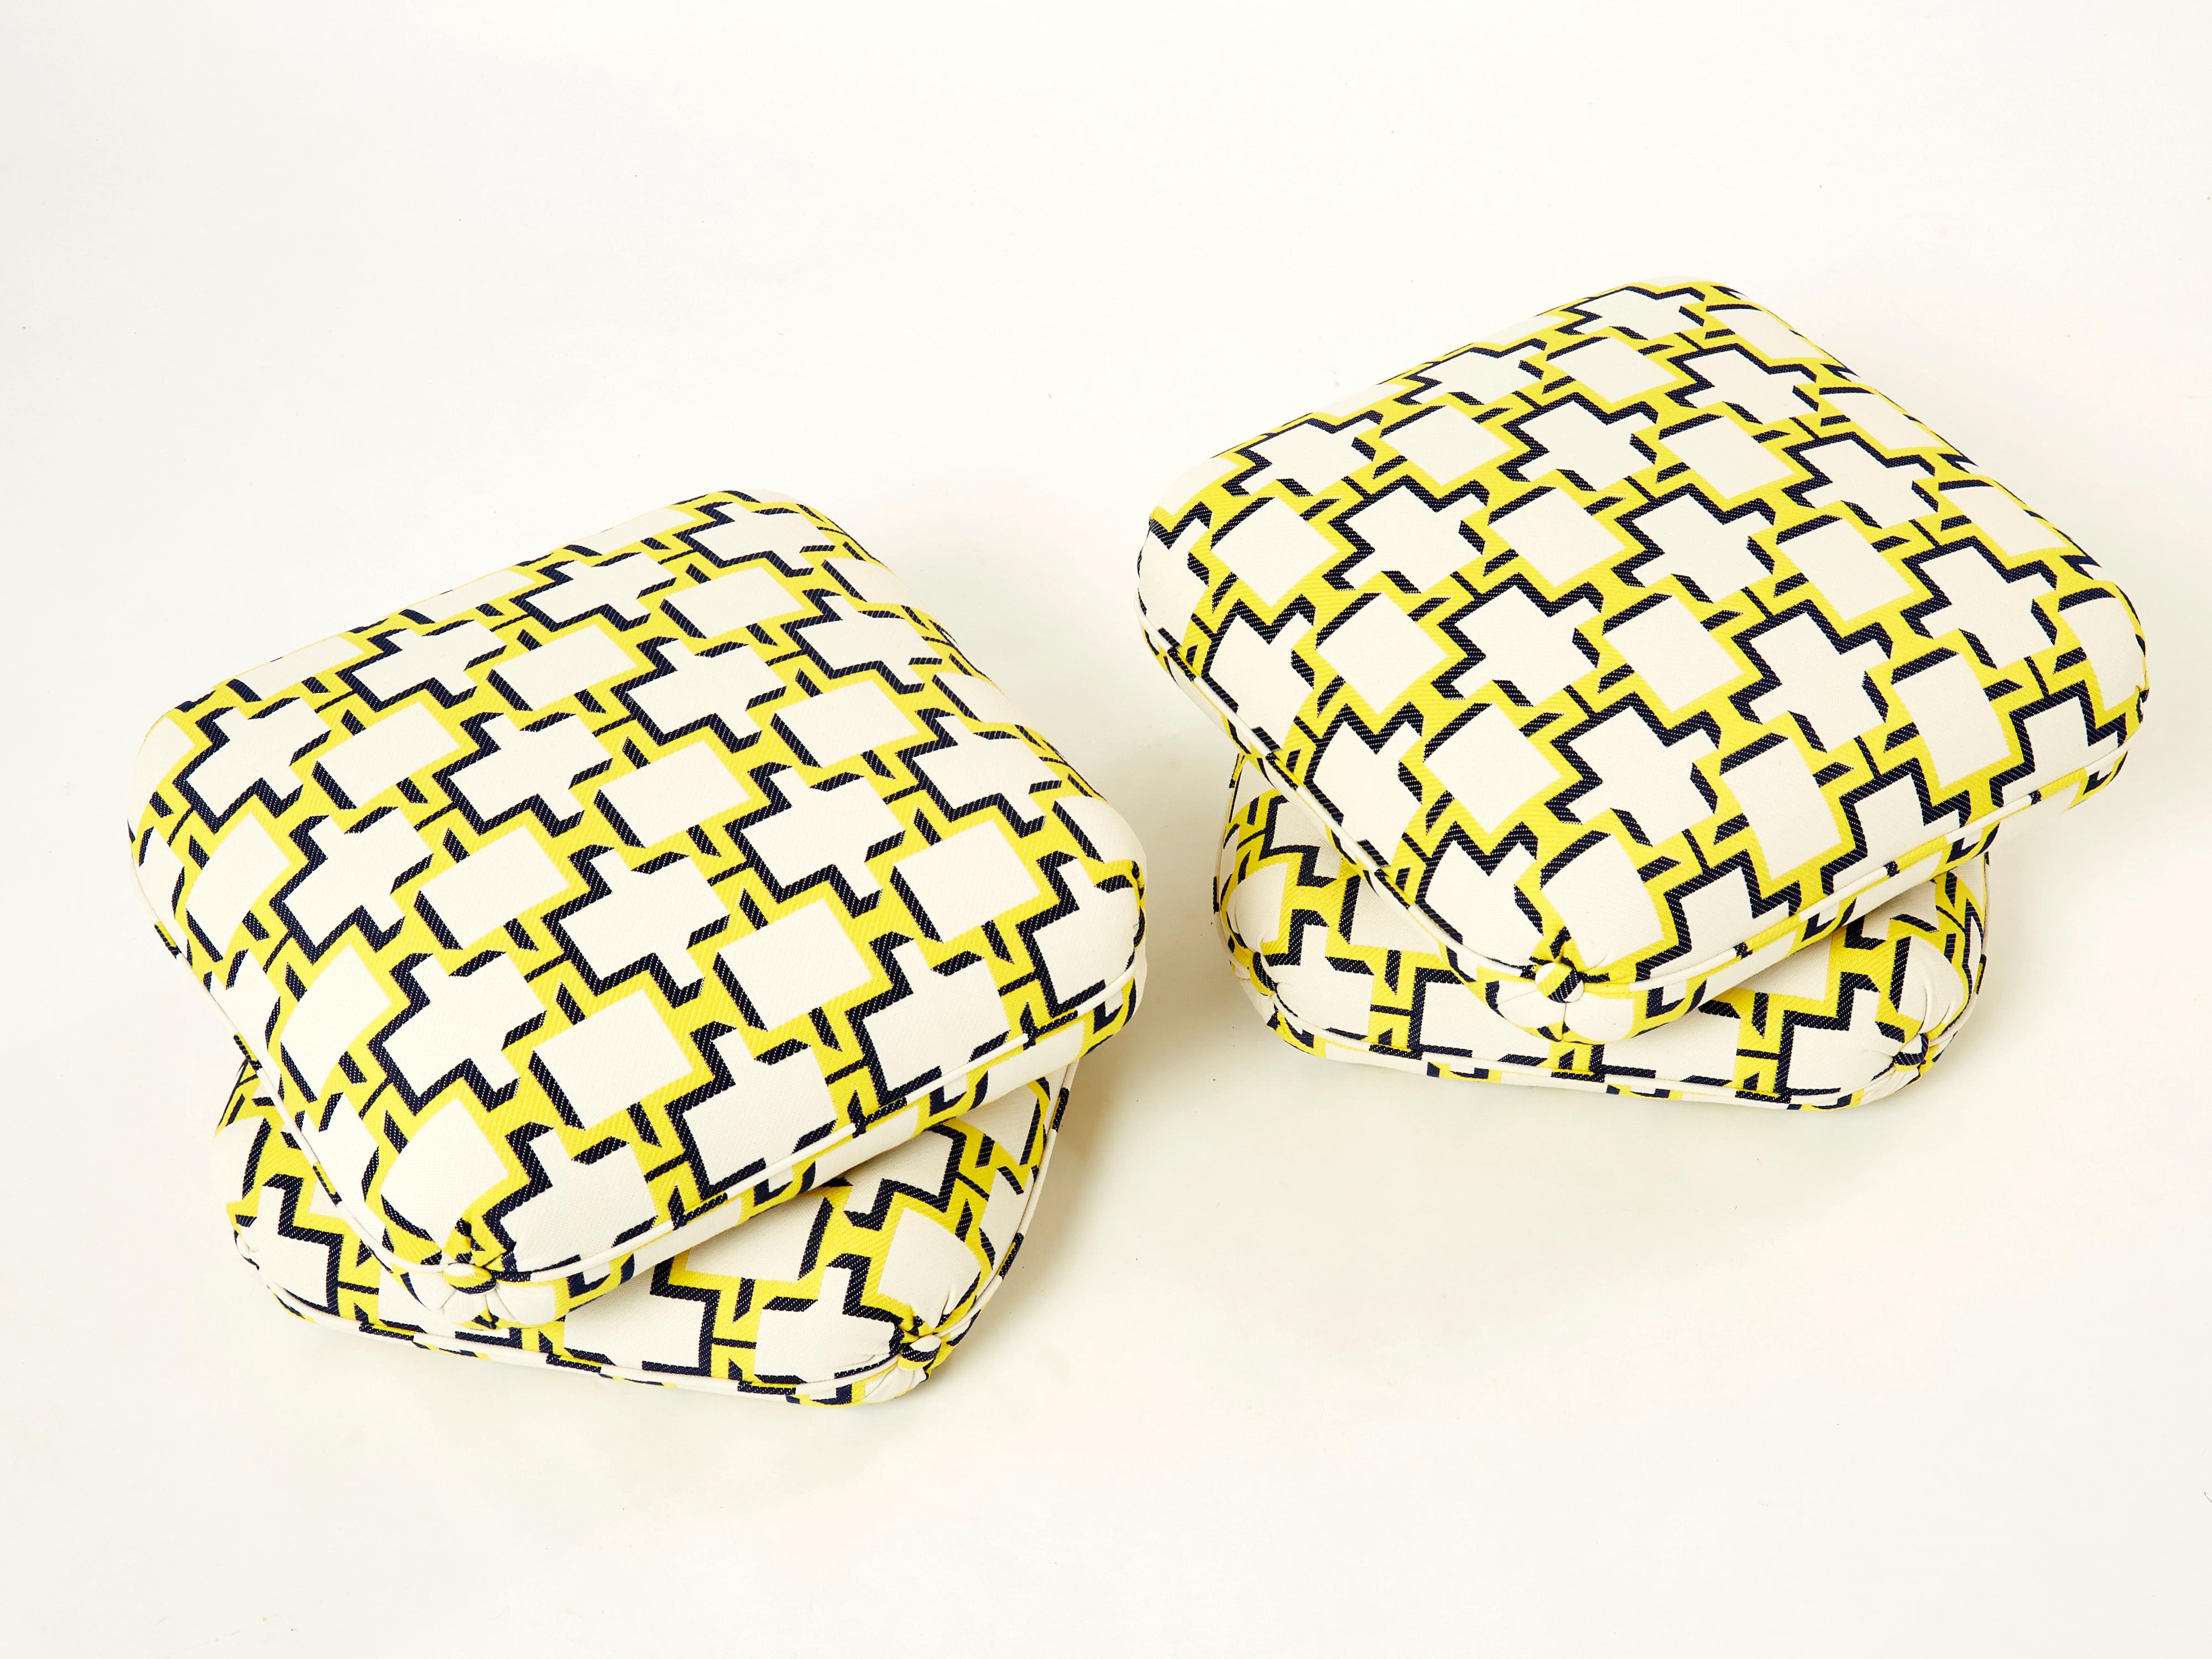 Beautiful pair of poufs or ottomans by French Designer Jacques Charpentier for Maison Jansen in the mid-seventies. The poufs consist of two large cushion elements connected together holding them in place. They have been newly upholstered in an